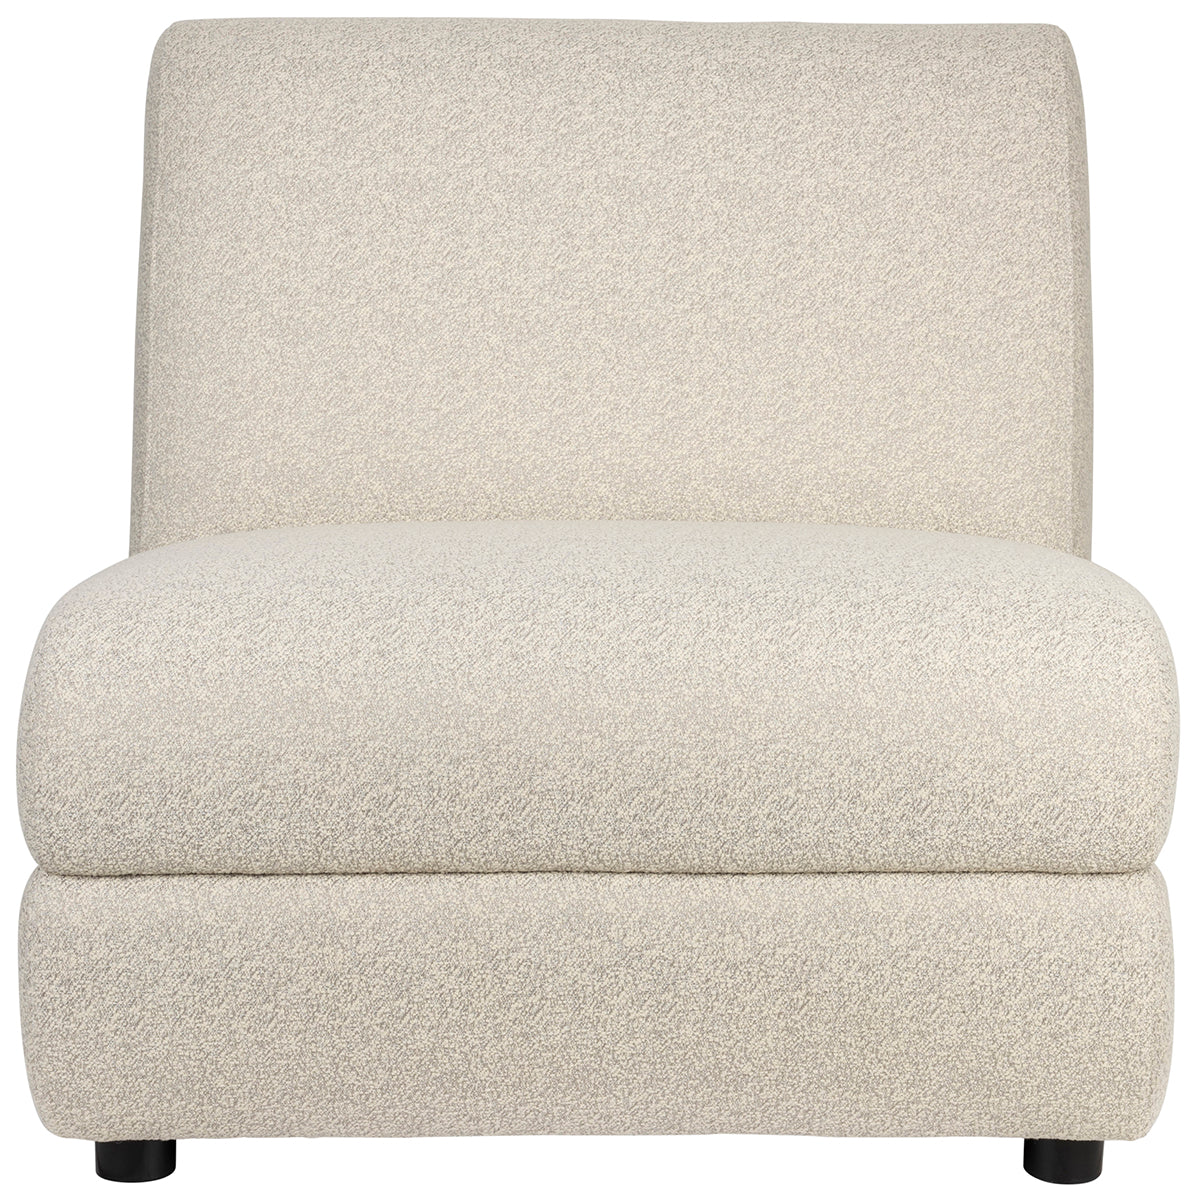 Mississippi Beige Outdoor Lounge Chair